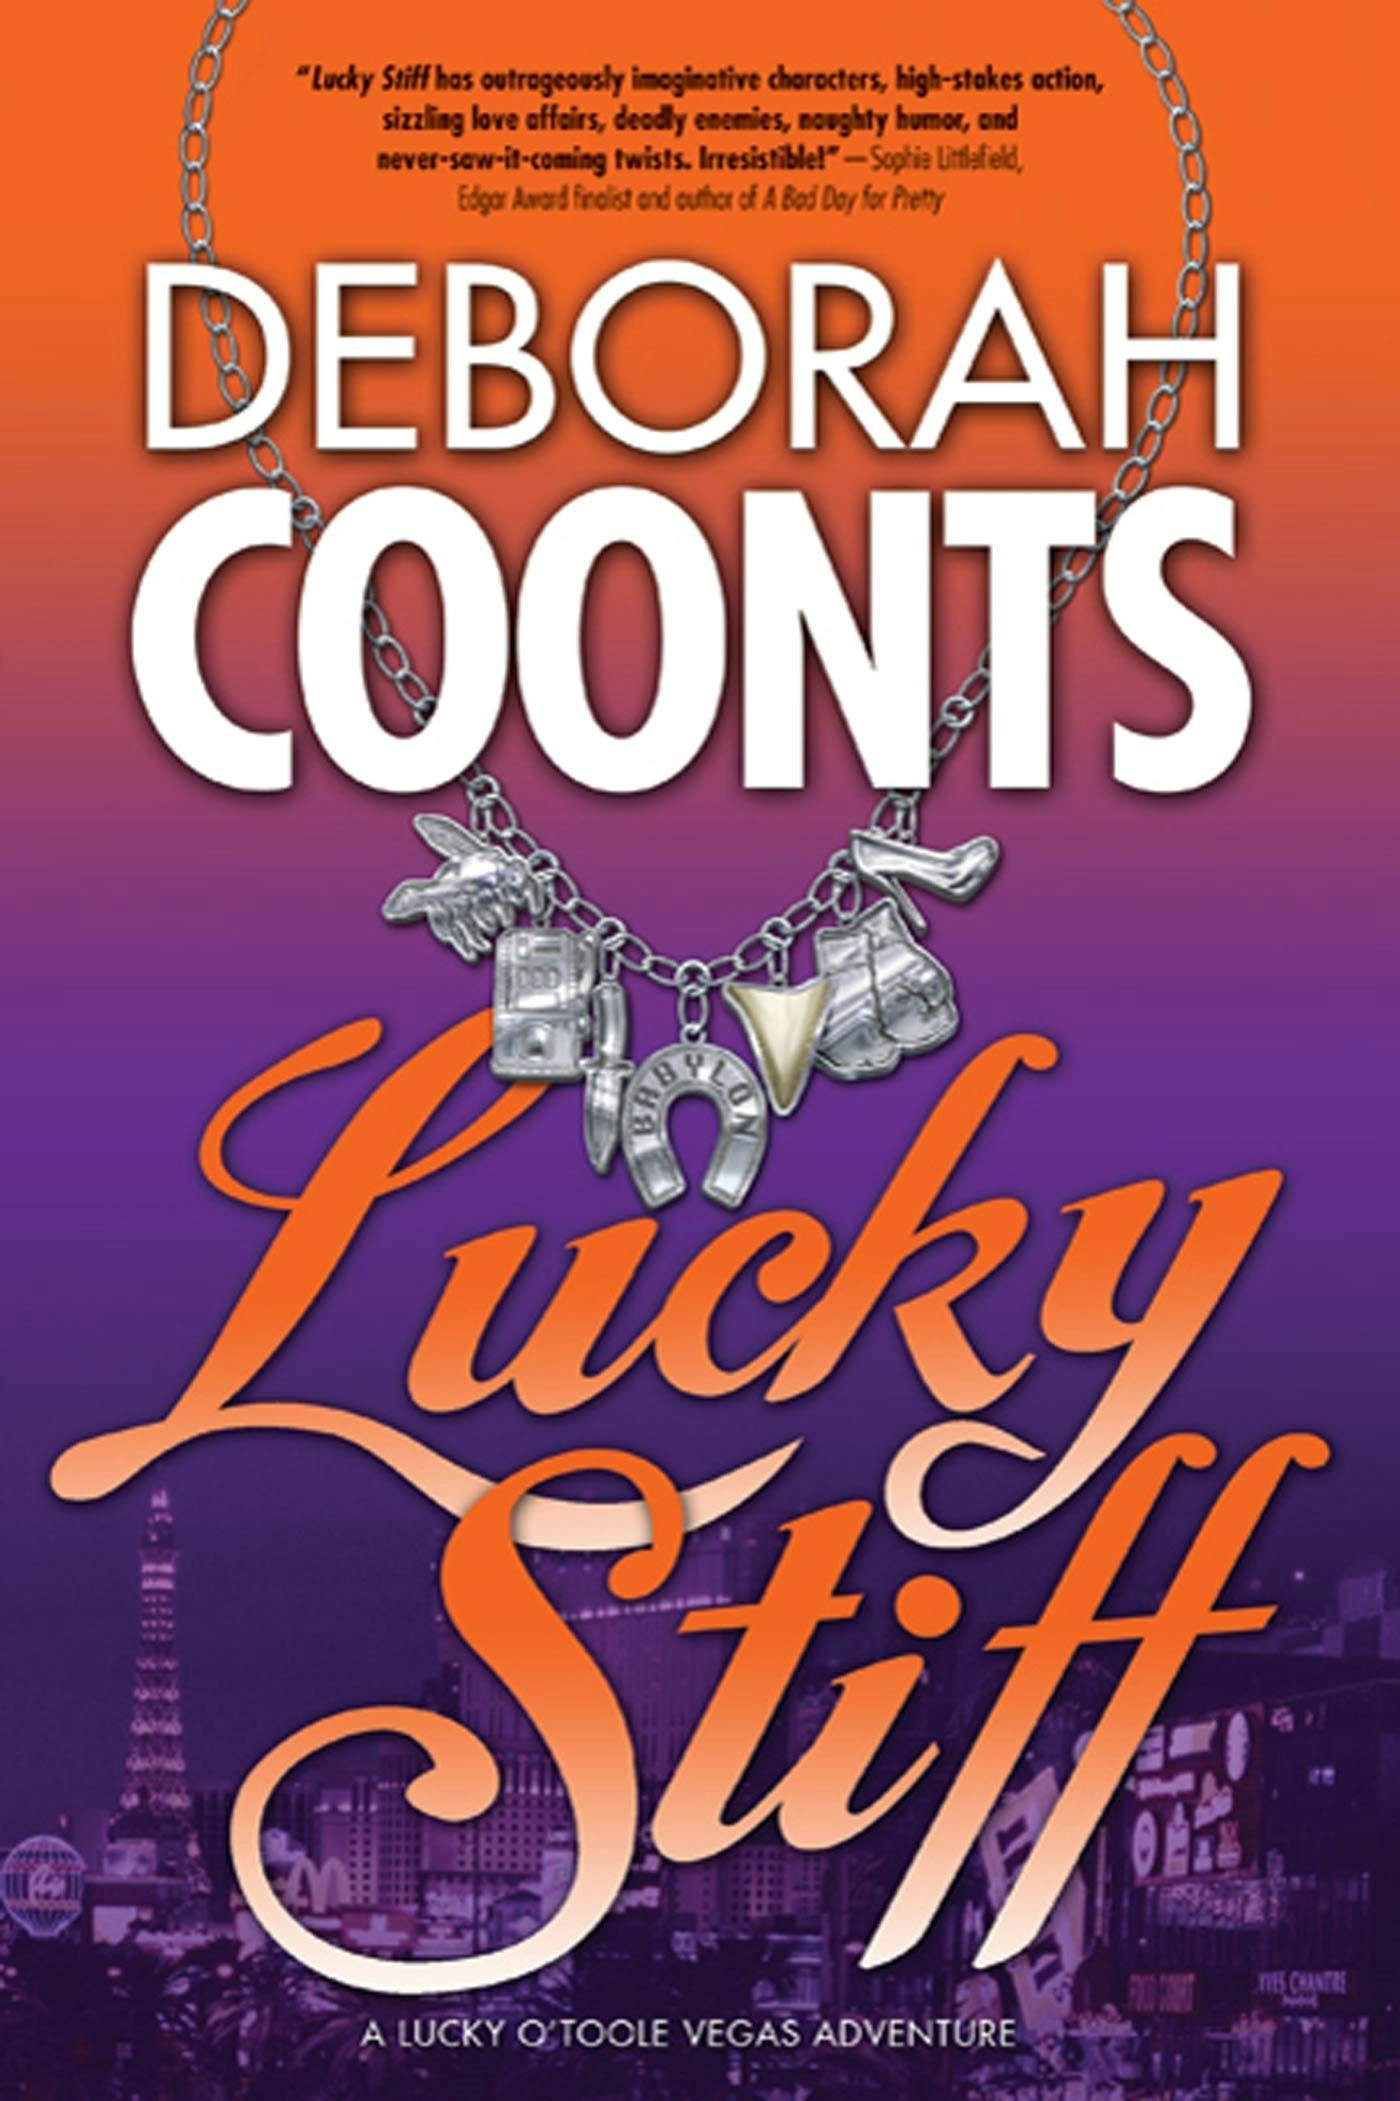 Cover for the book titled as: Lucky Stiff